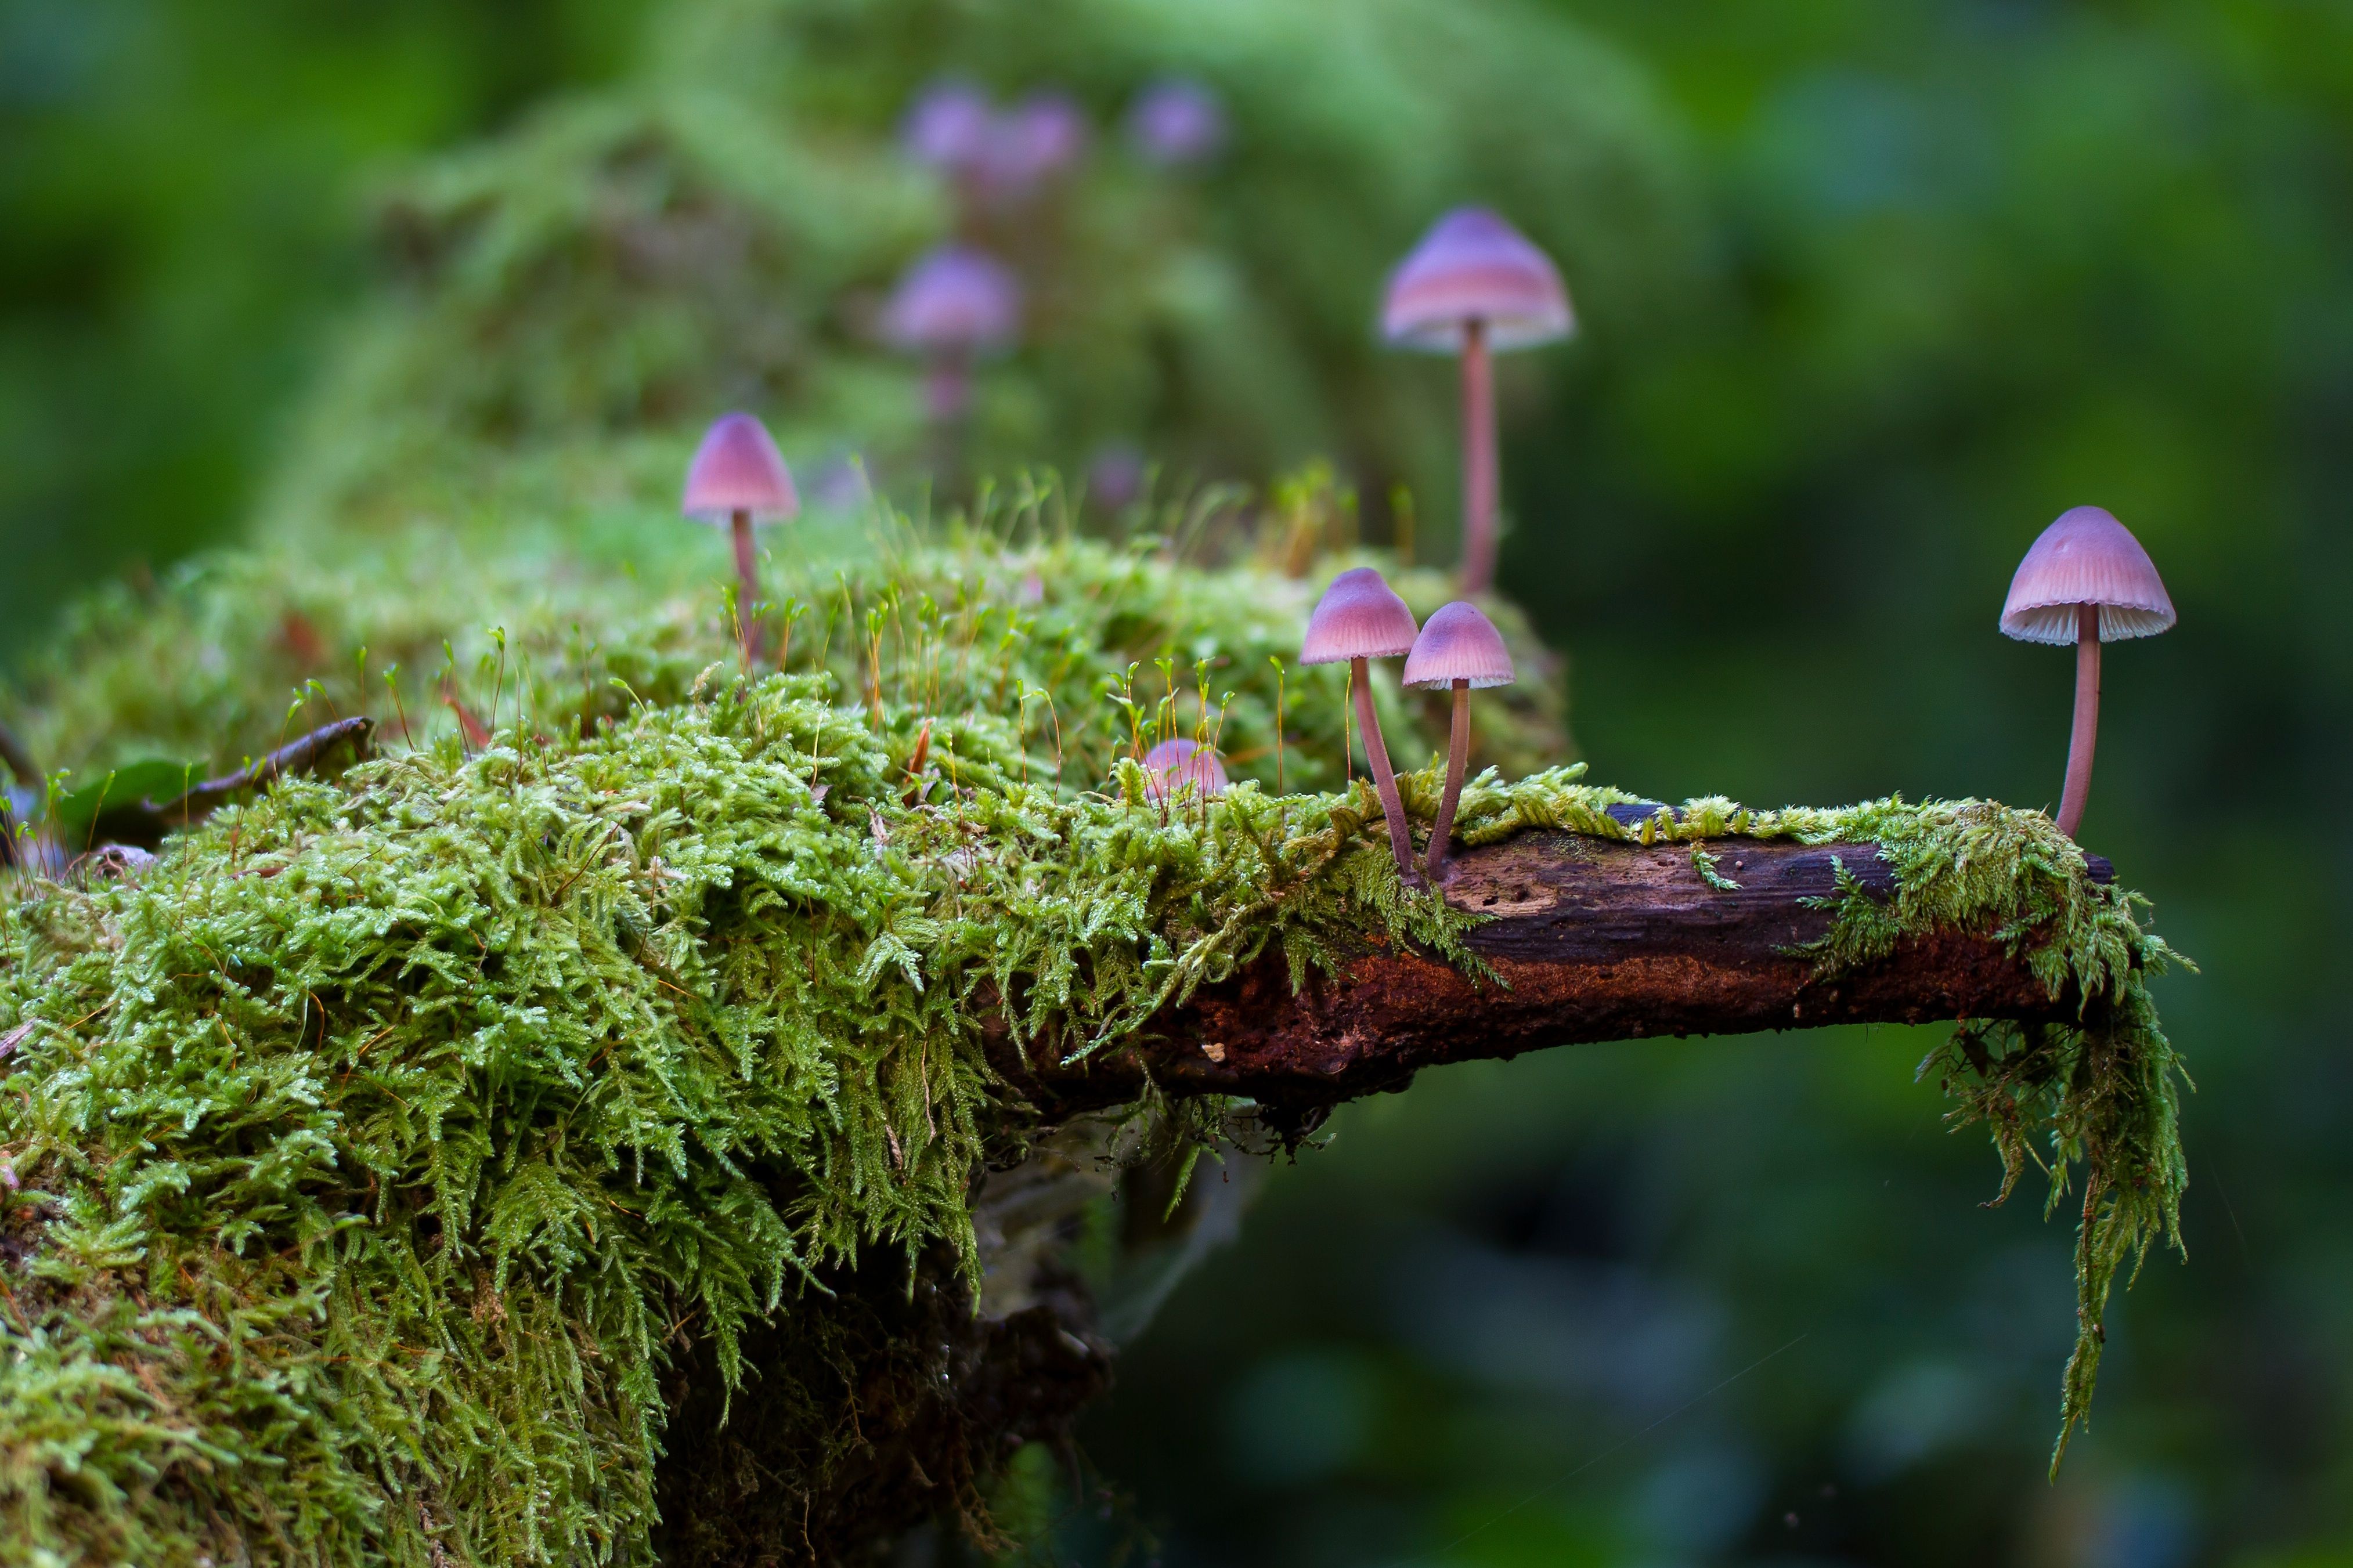 Tiny Mushrooms on a Log with Moss 4k Ultra HD Wallpaper. Background